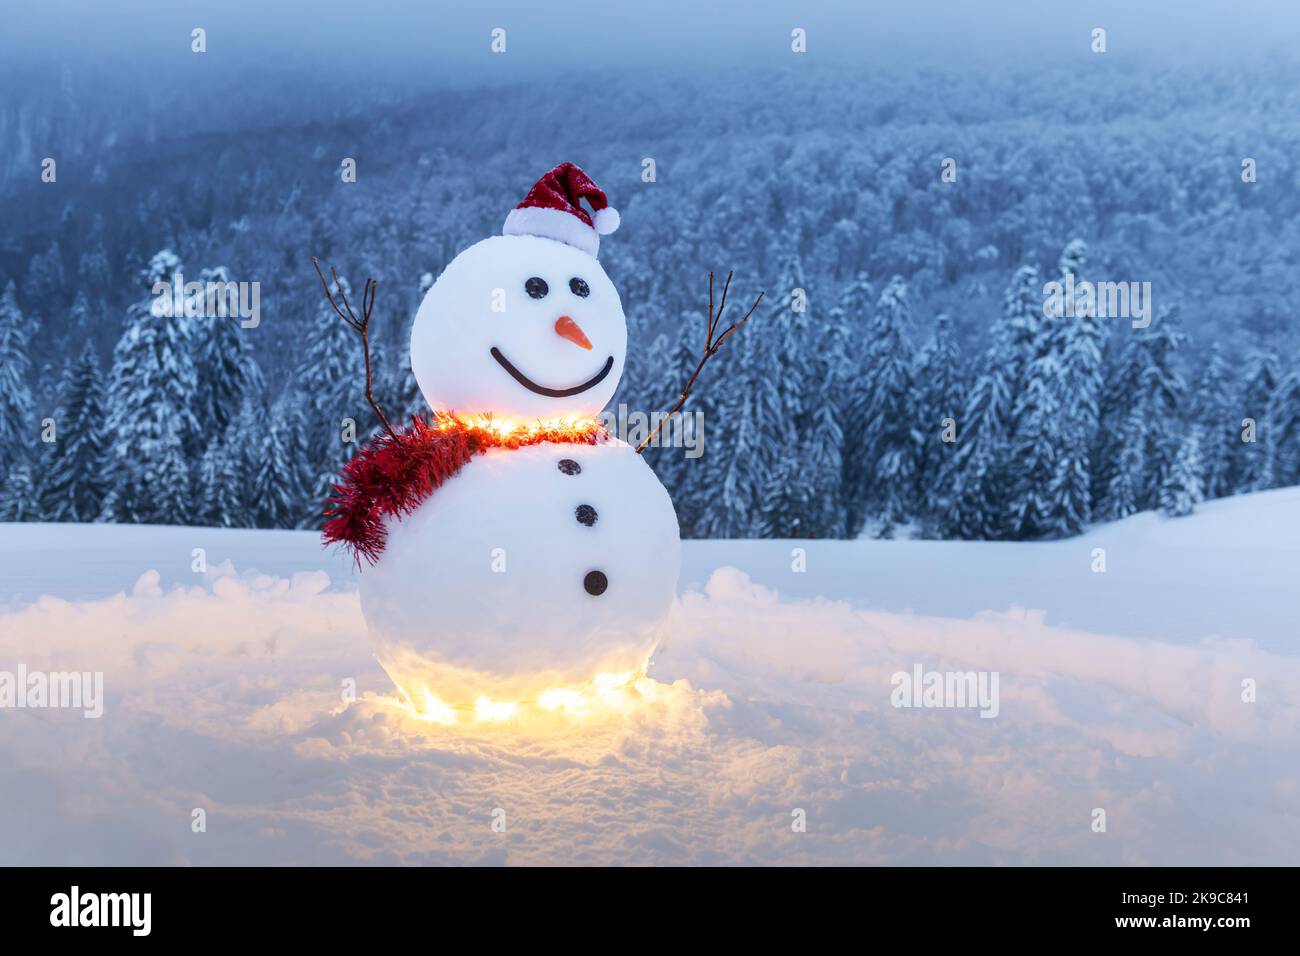 Funny snowman in stylish red hat and red scalf on snowy mountains. Glowing garland for Christmas vibe Stock Photo